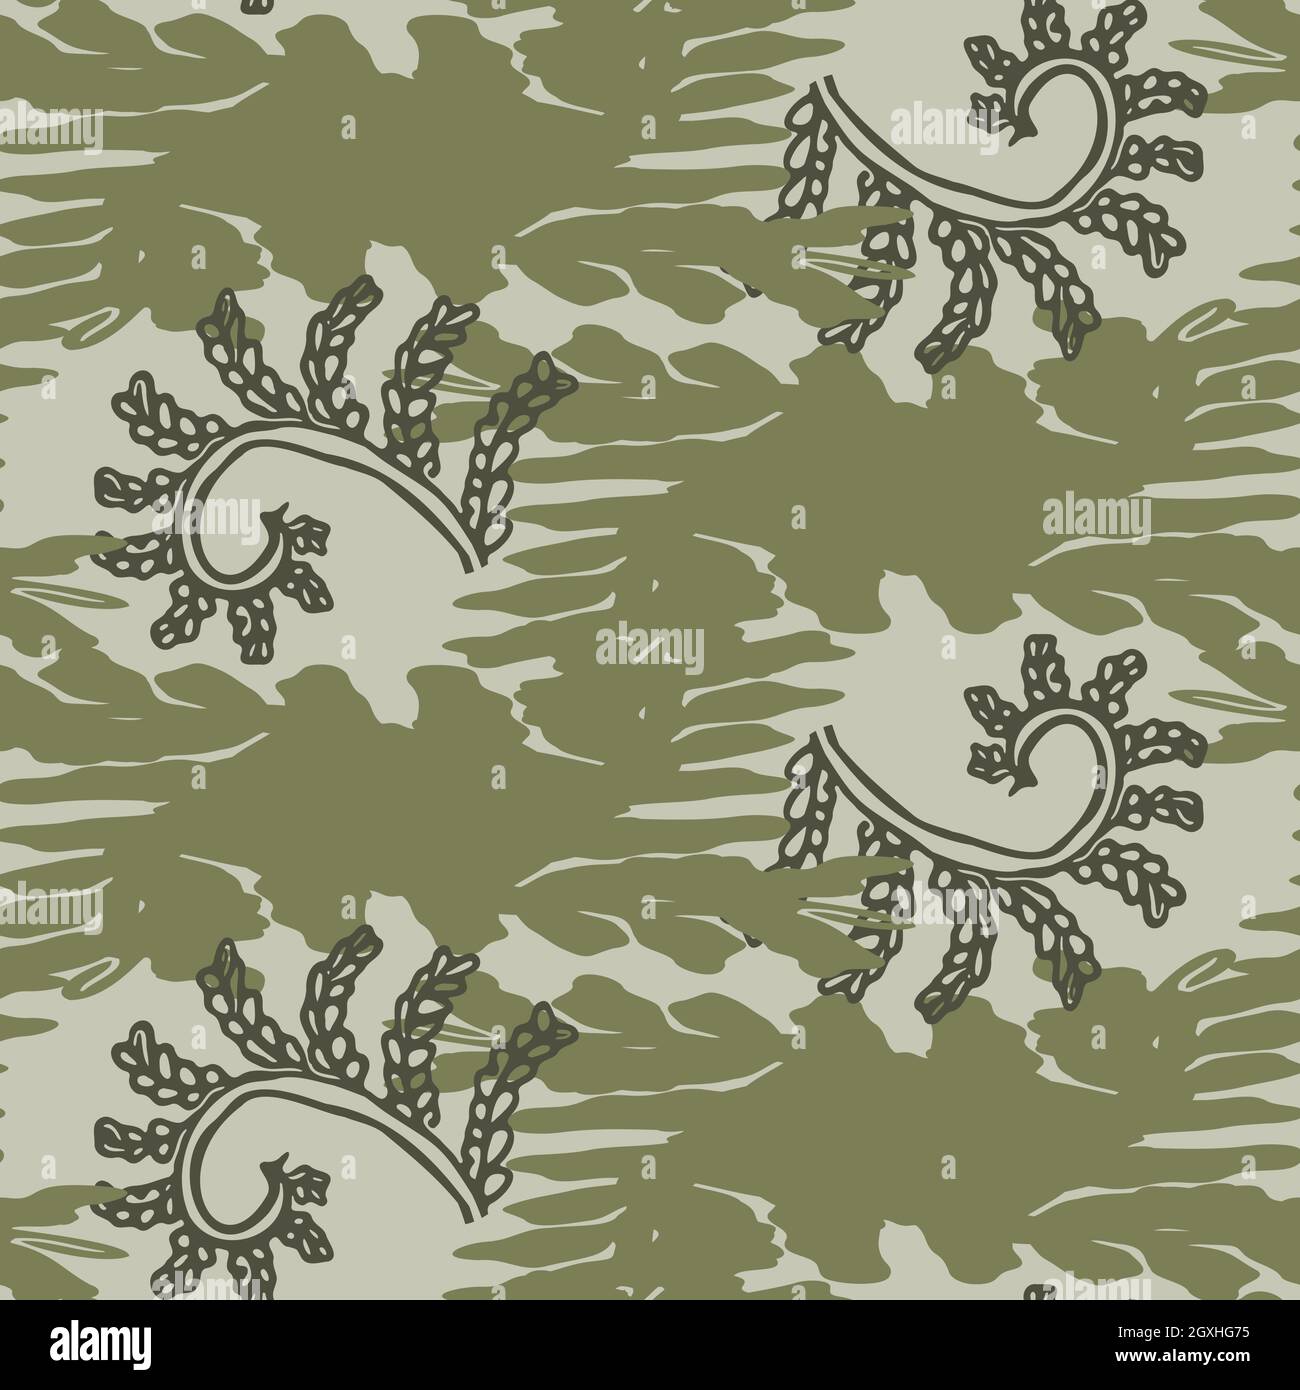 Retro botanical fern frond vector pattern. Seamless vintage ecological foliage for all over print. Hand drawn ornate forest leaf backdrop. Stock Vector